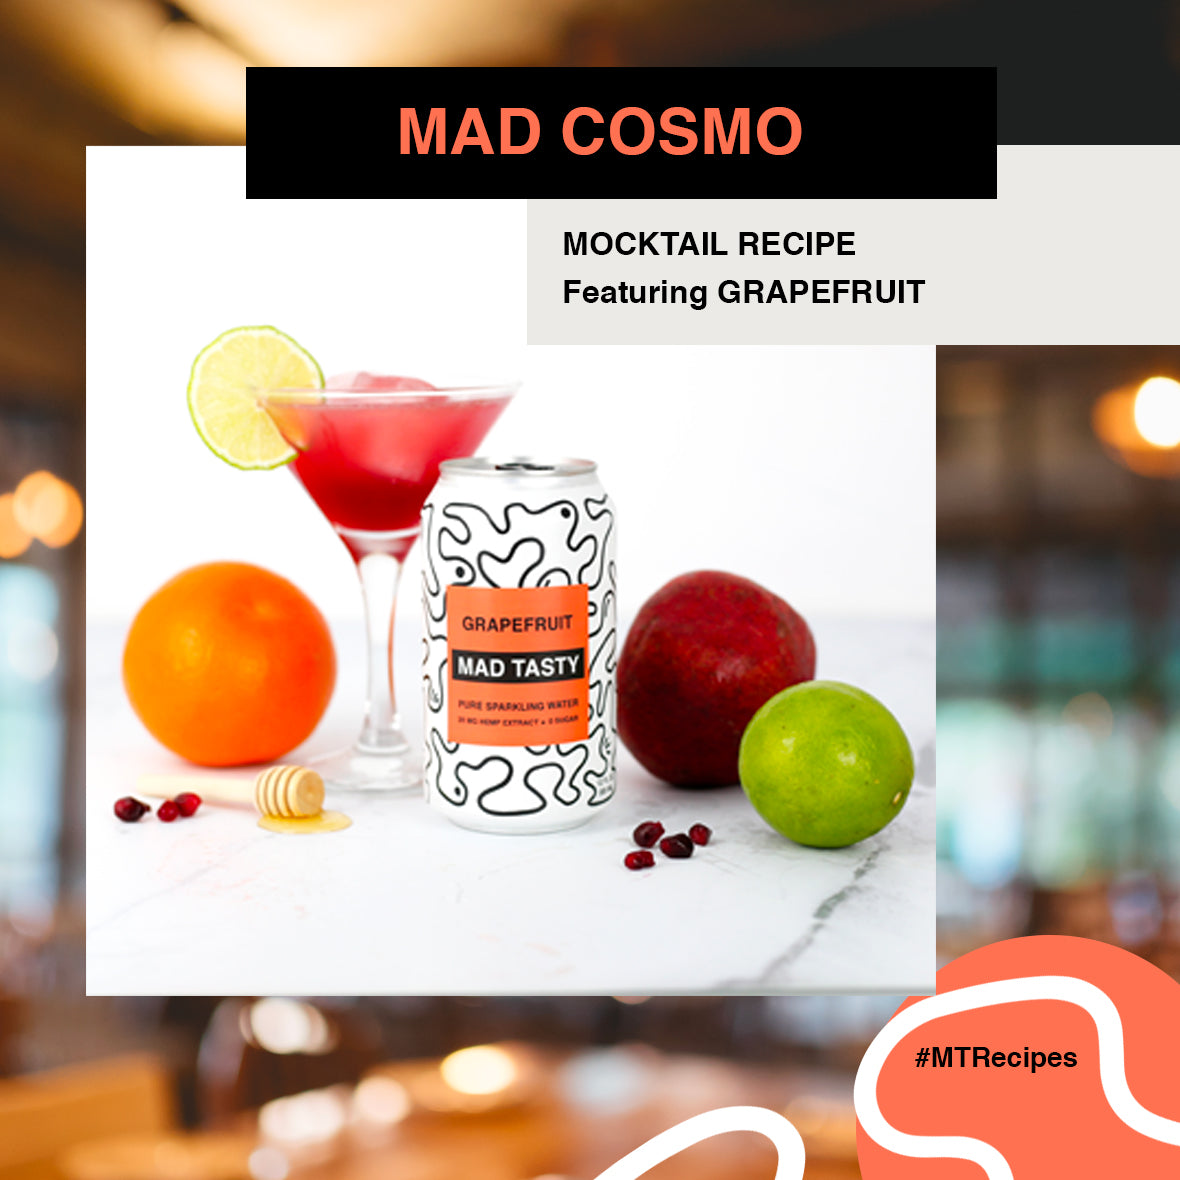 MAD COSMO